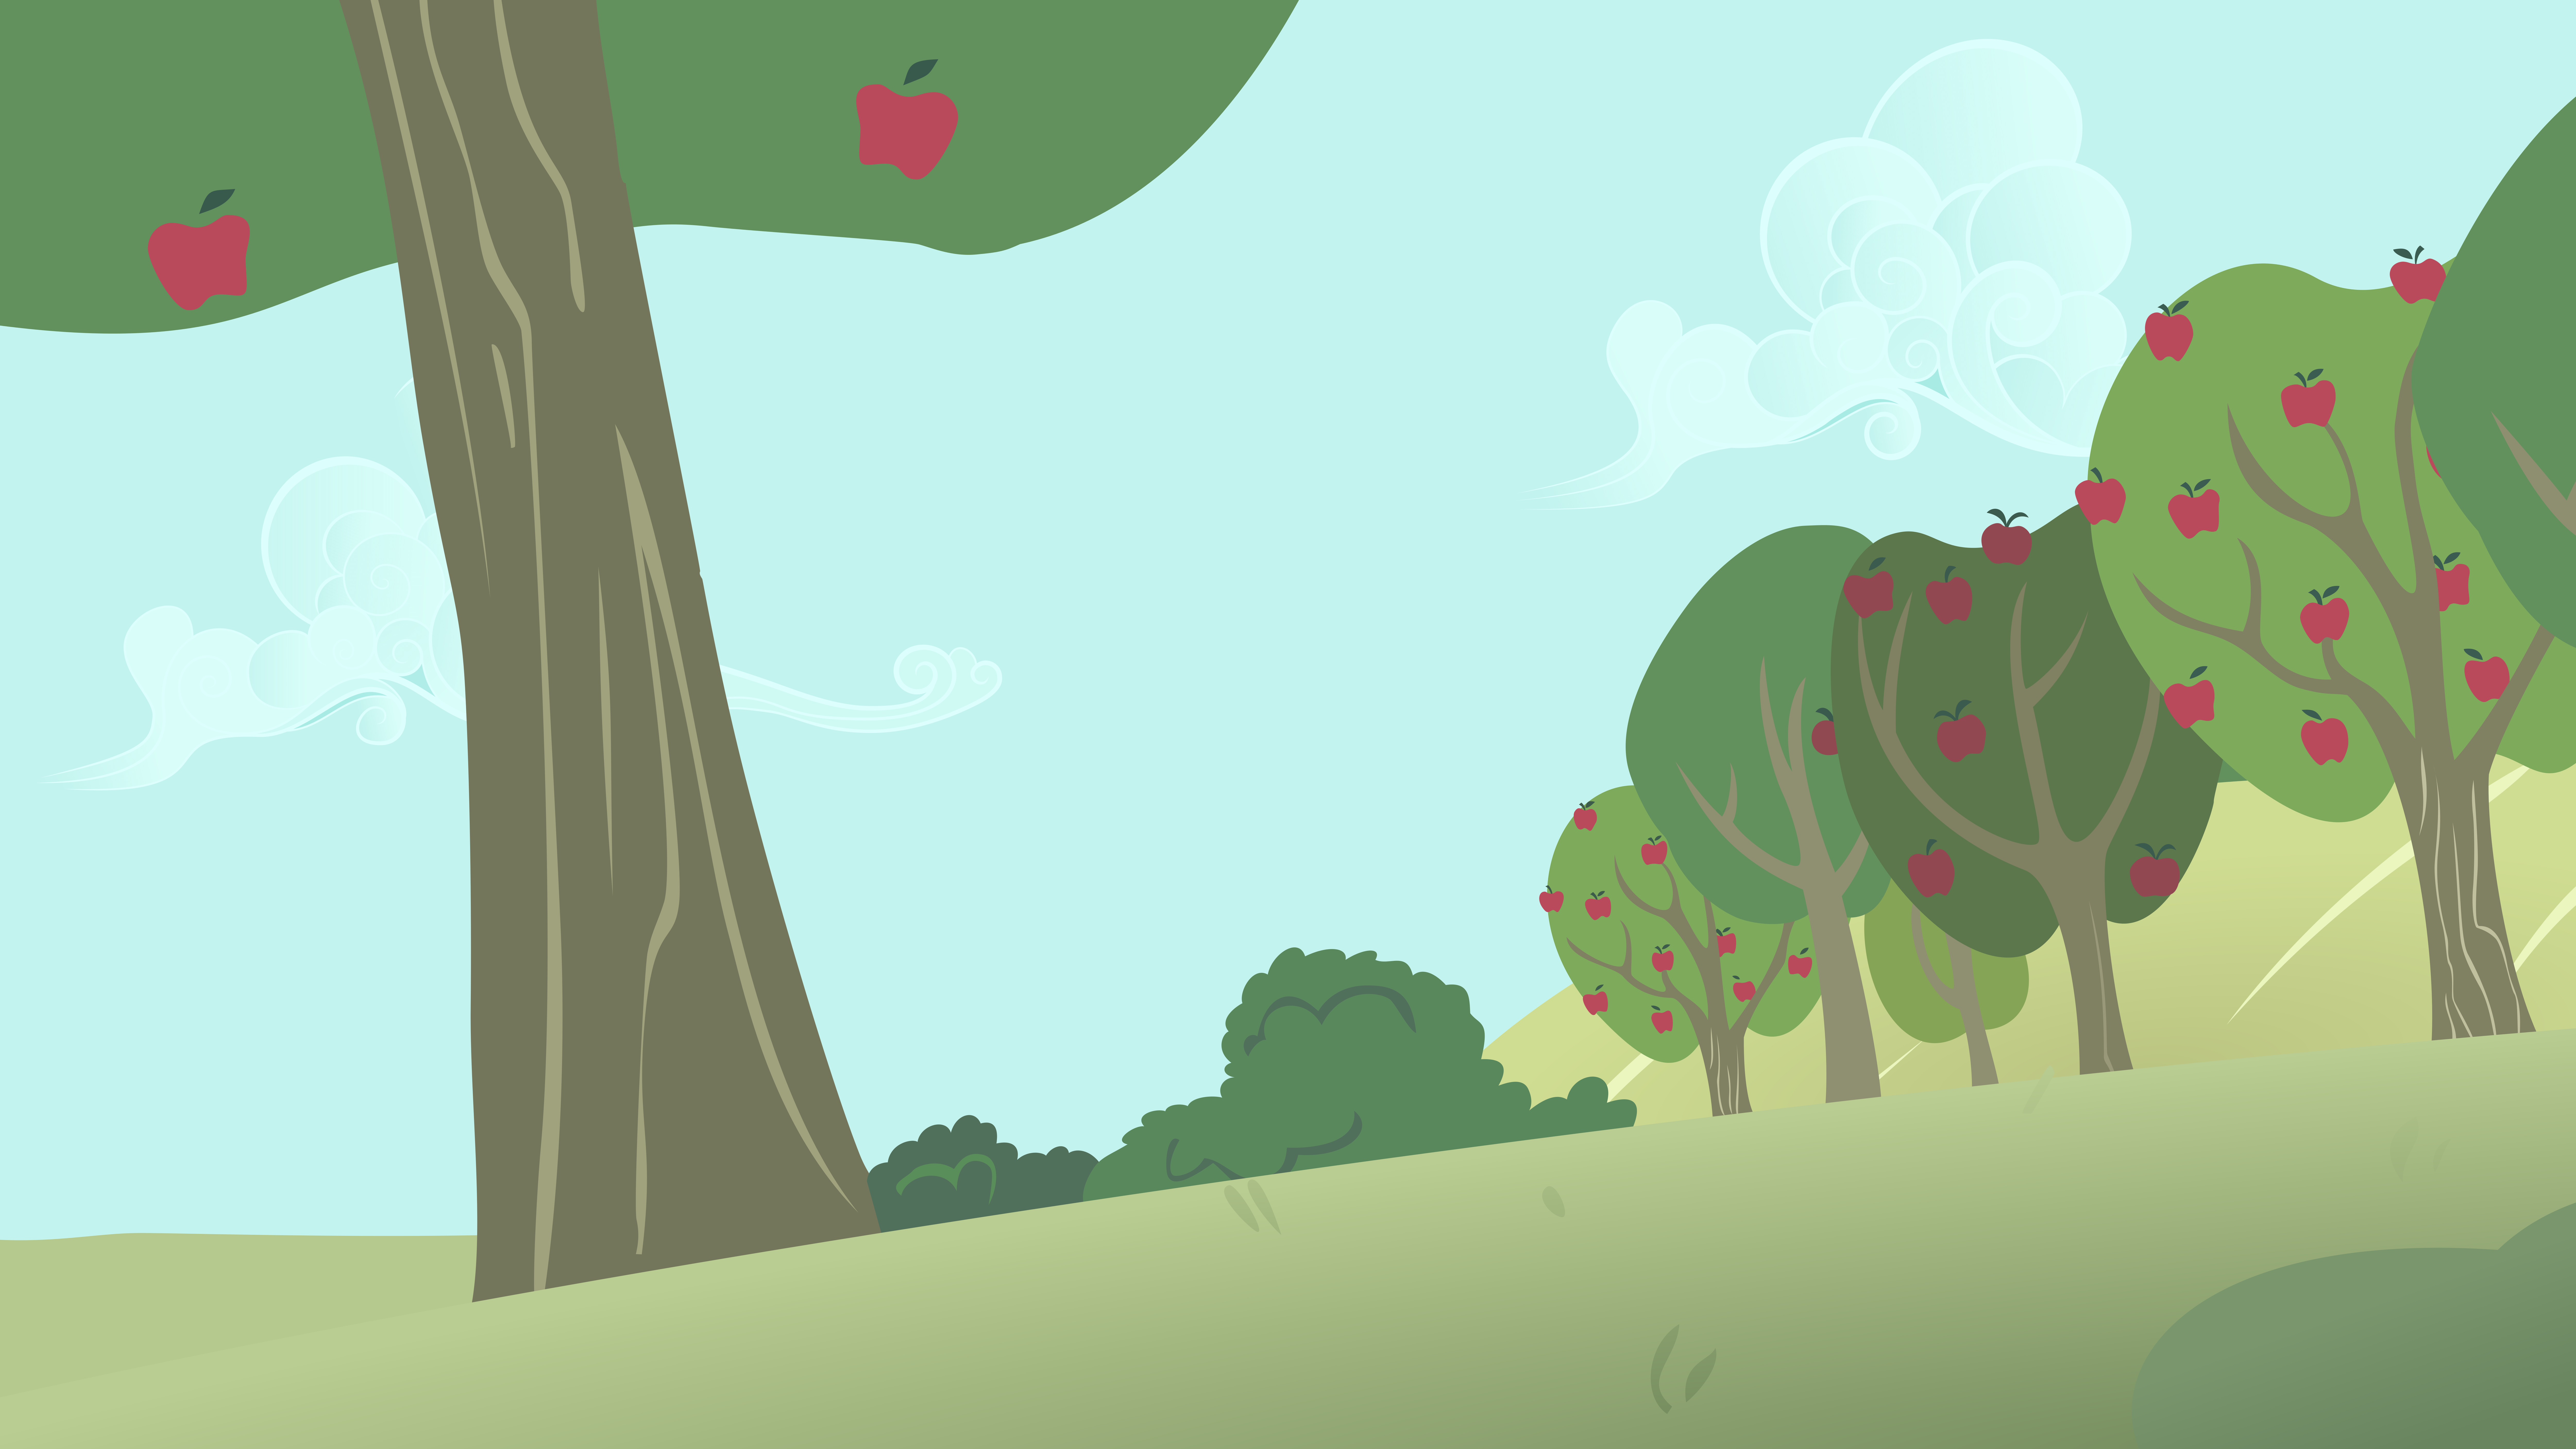 Background - Apples